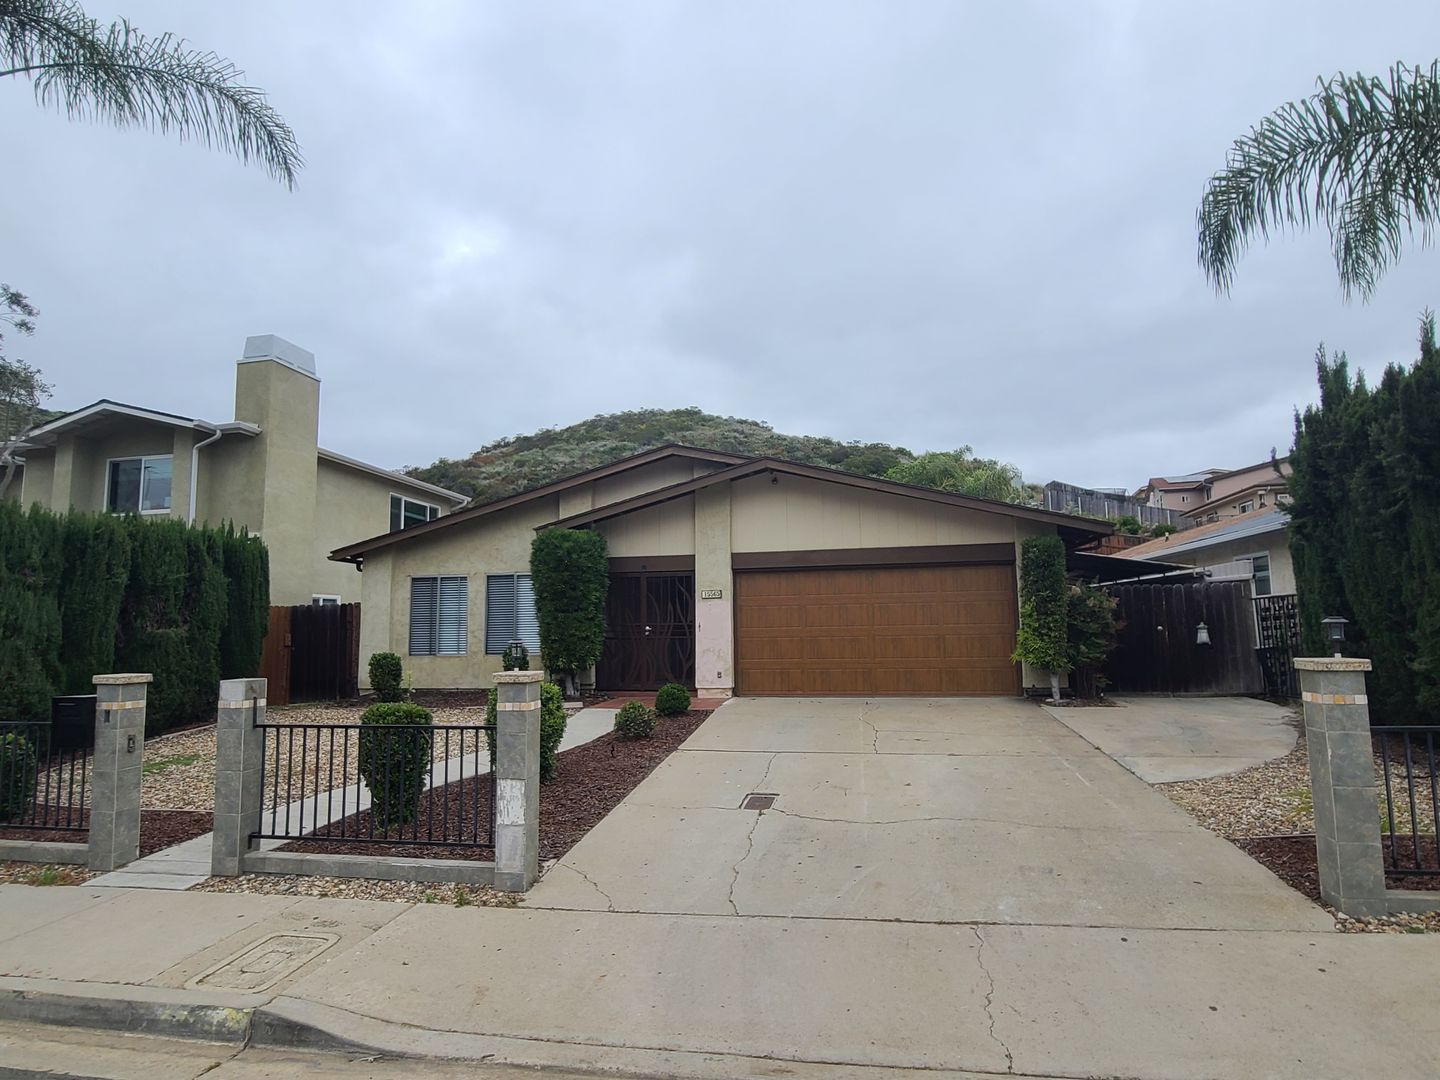 Gorgeous & Comfortable Home in Poway Unified School District! - Central A/C - Attached Garage - Private, Tiered Backyard